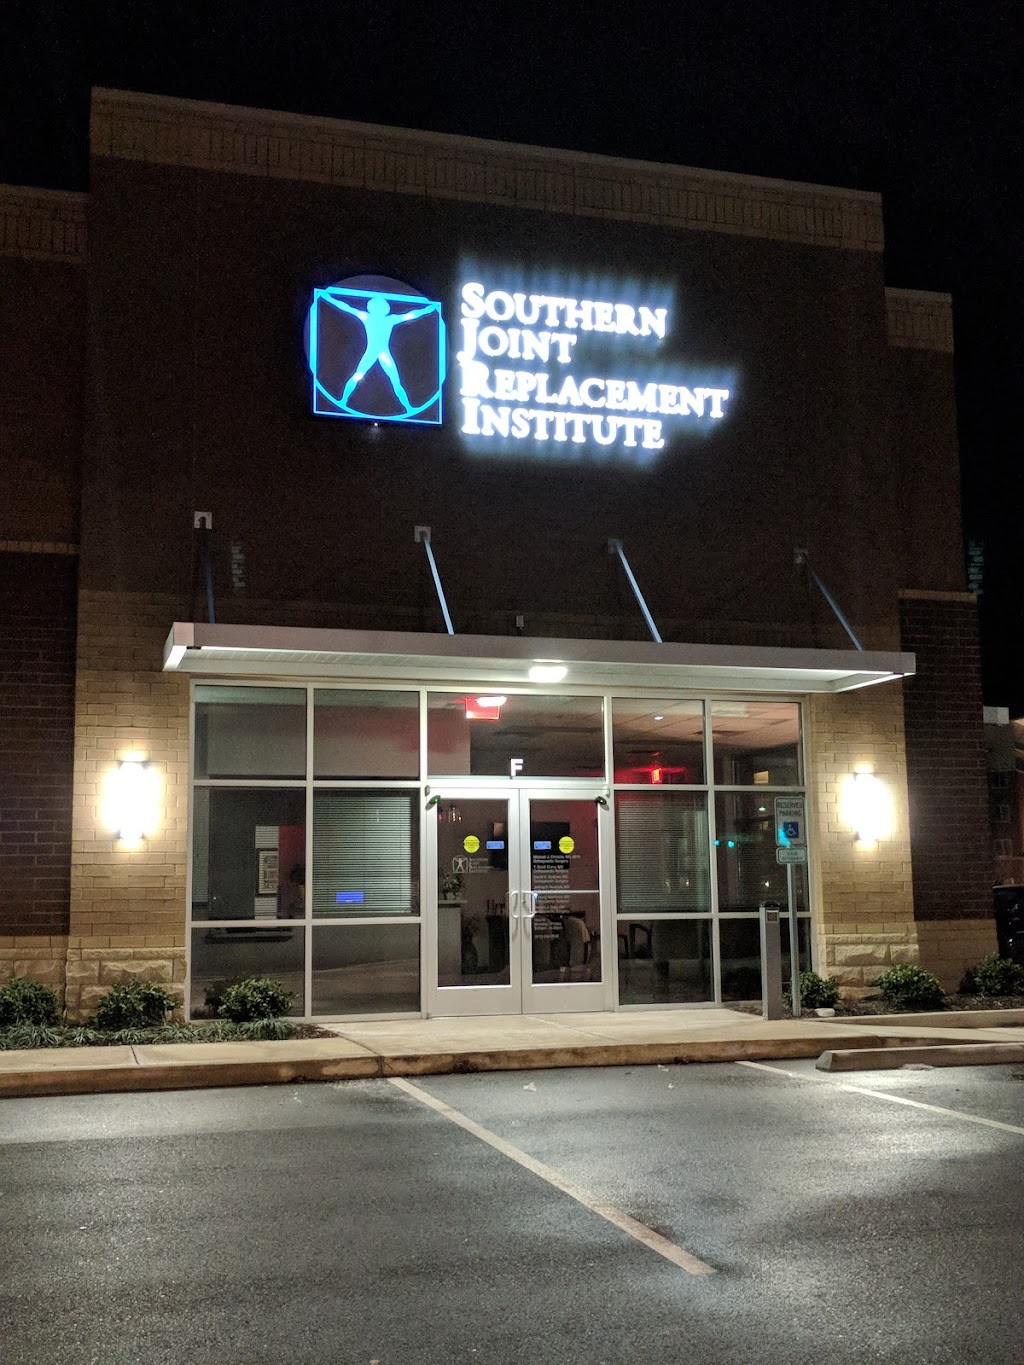 Southern Joint Replacement Institute - Murfreesboro | 3053 Medical Center Pkwy Suite F, Murfreesboro, TN 37129 | Phone: (615) 342-0038